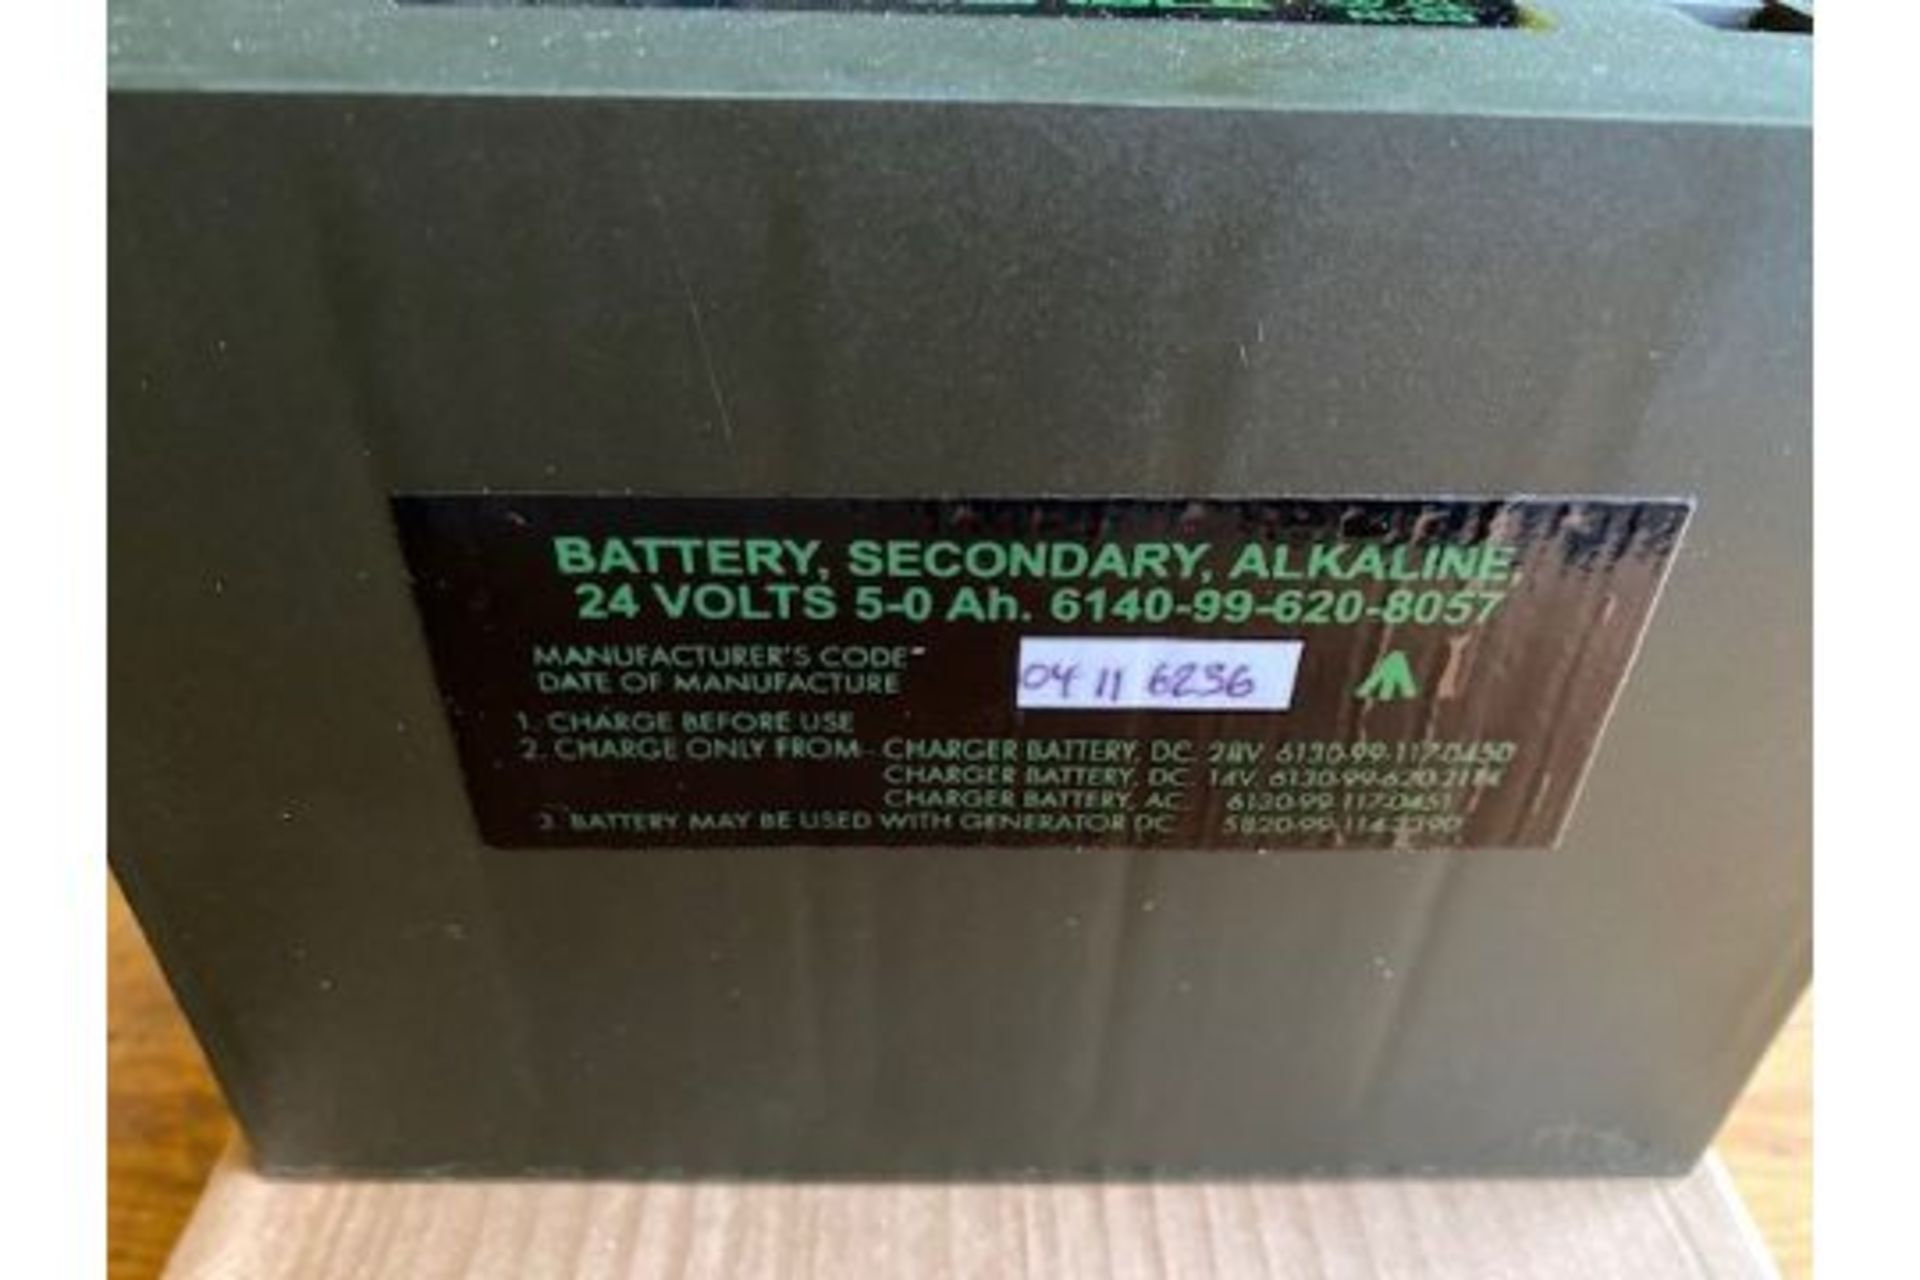 2 x New Unissued Clansman 24 Volt Rechargeable Radio Battery - Image 5 of 5